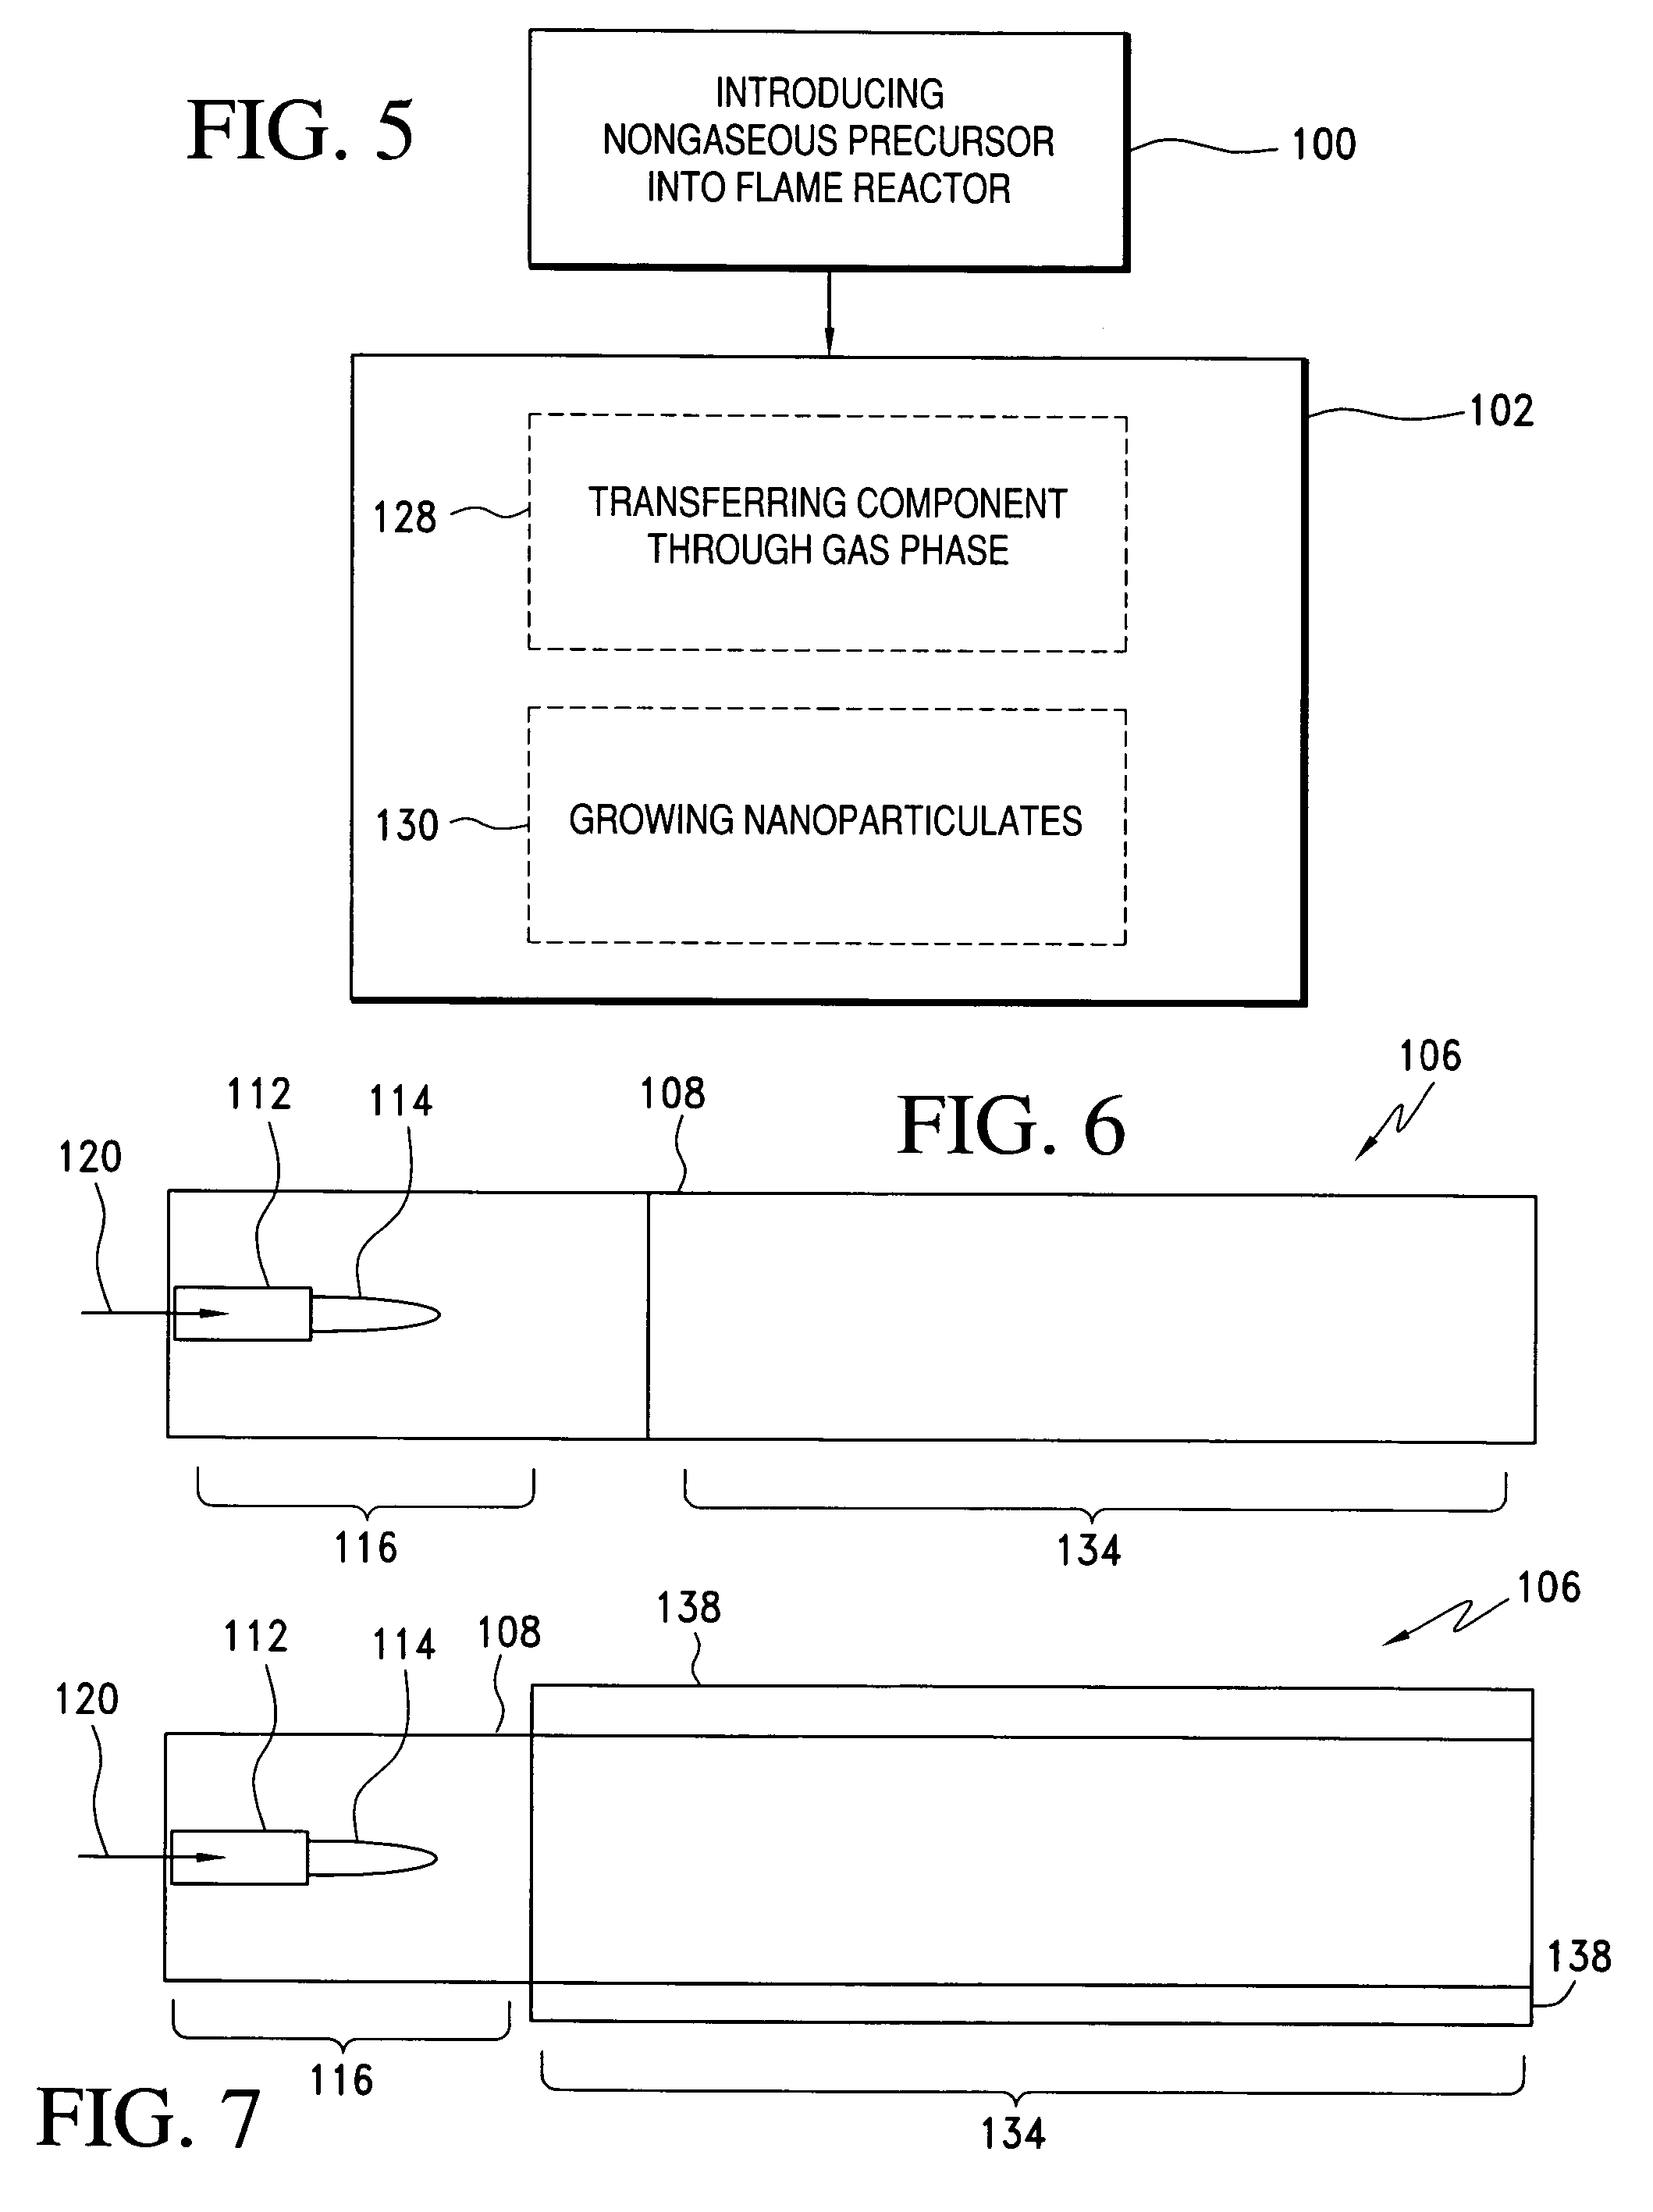 Method of making nanoparticulates and use of the nanoparticulates to make products using a flame reactor